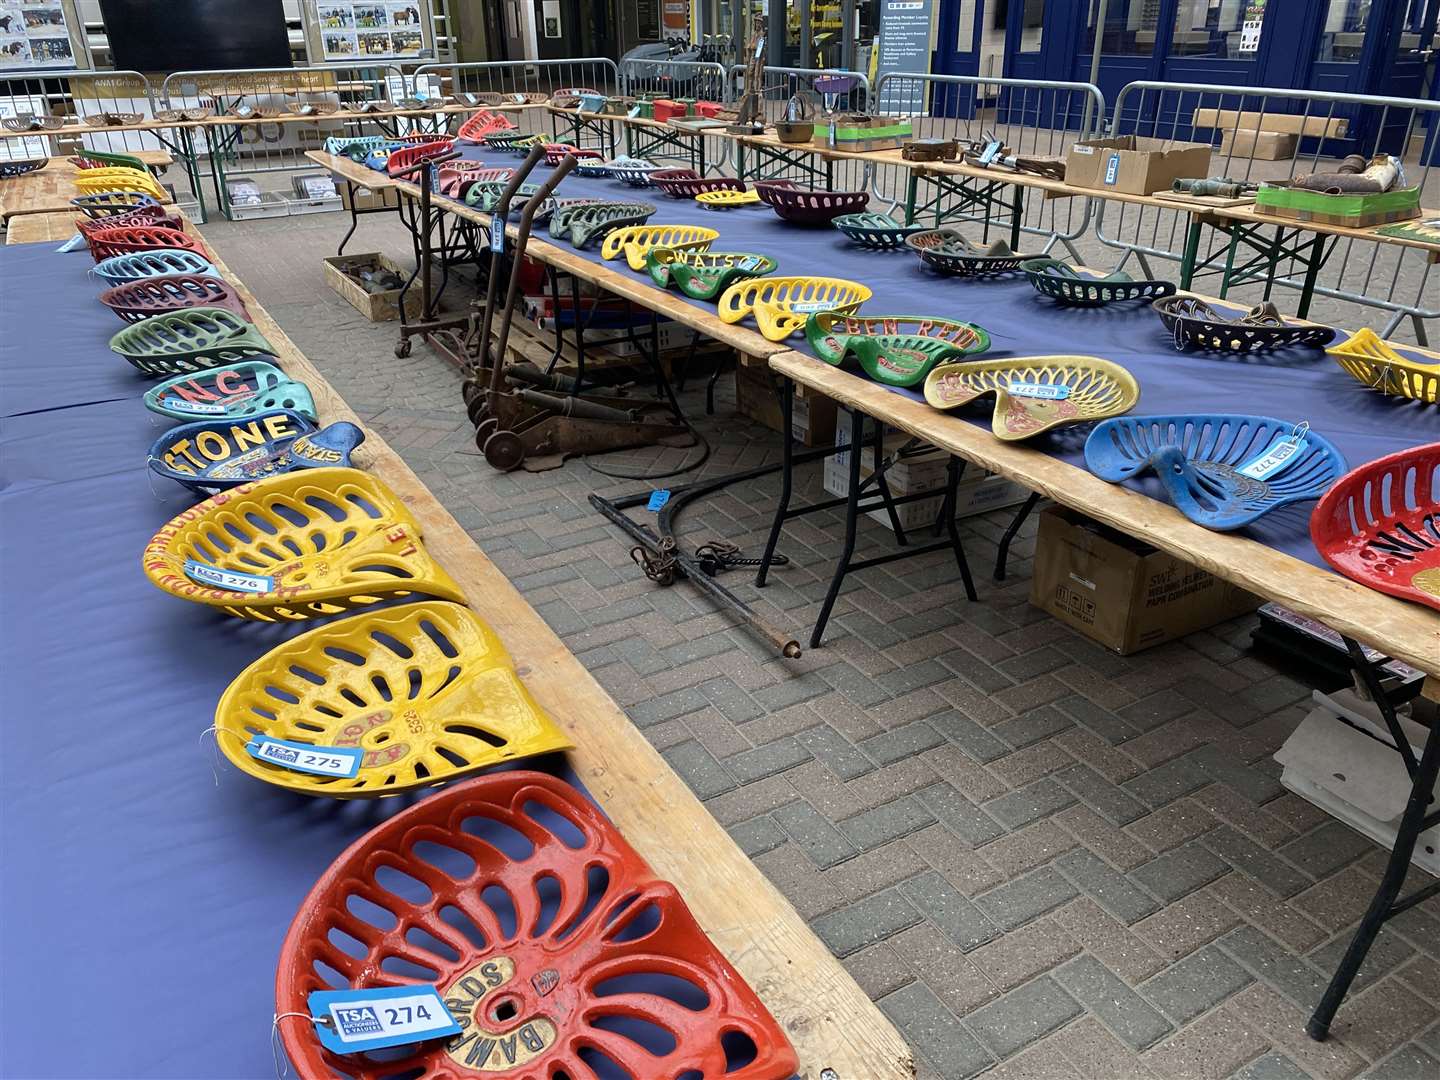 The sale of vintage seats drew buyers from across the UK